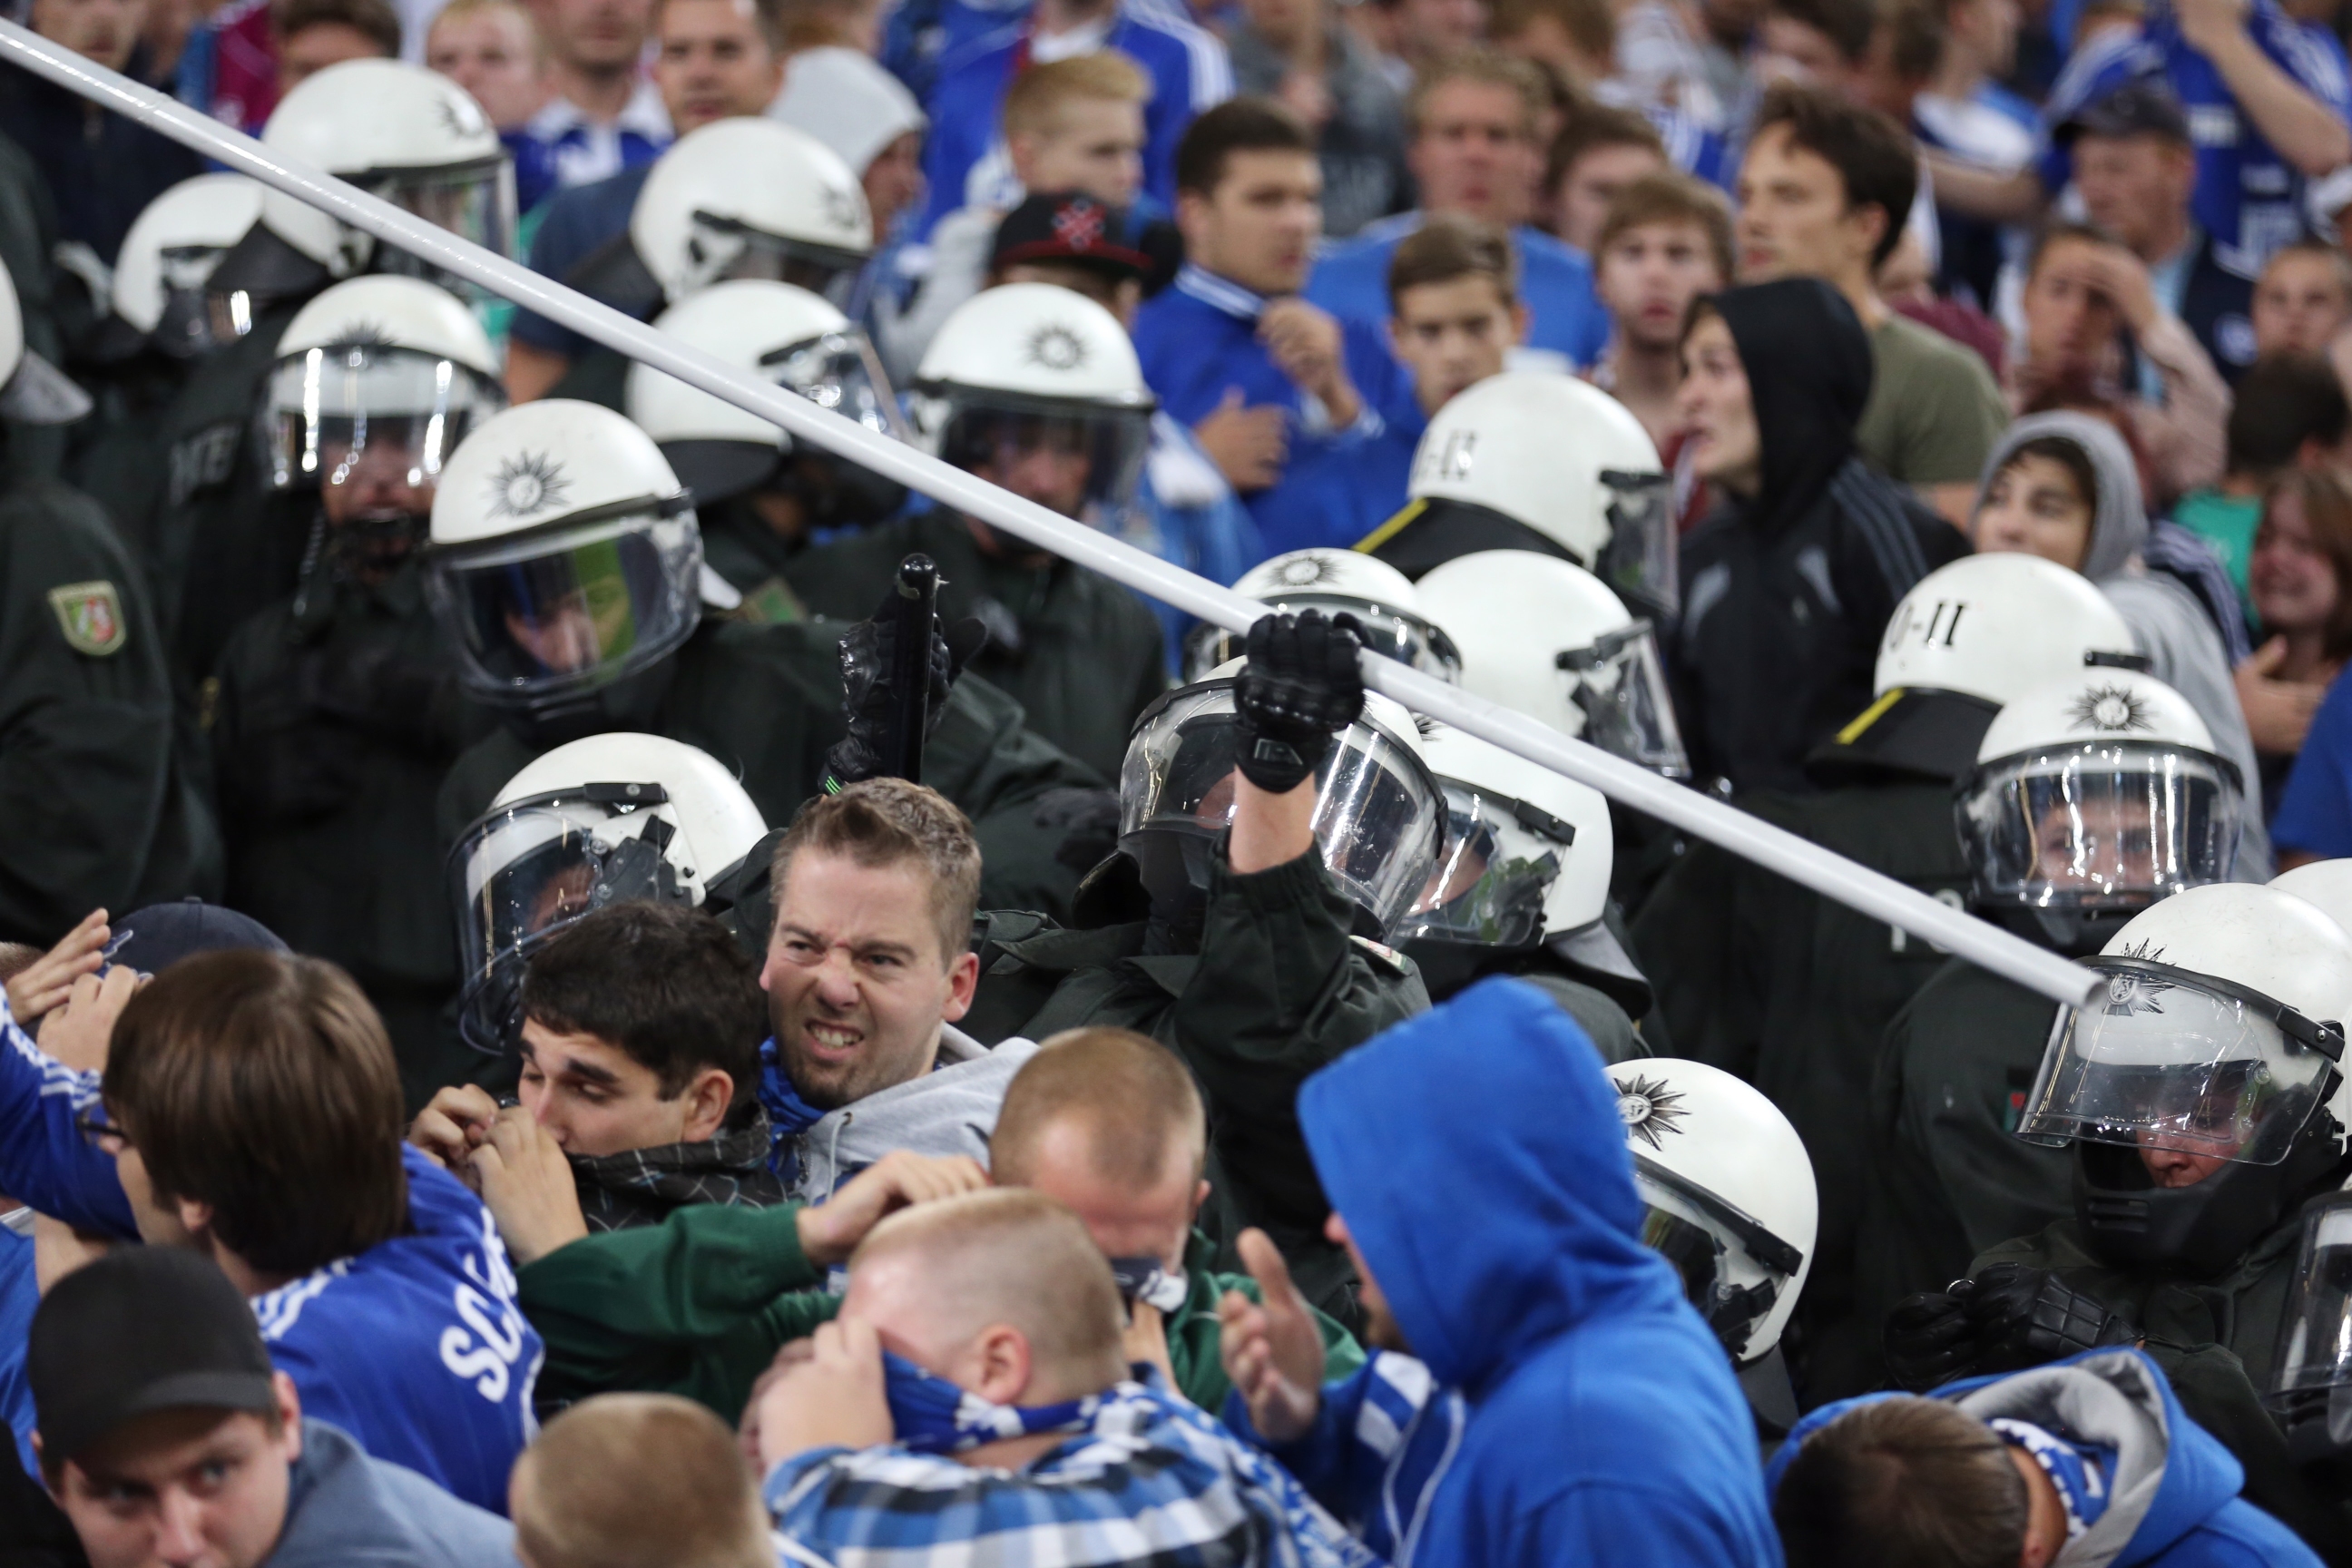 German police confront supporters of Schalke during a Uefa Champions League soccer match on Wednesday between FC Schalke 04 and PAOK Saloniki in Gelsenkirchen. Photo: AFP